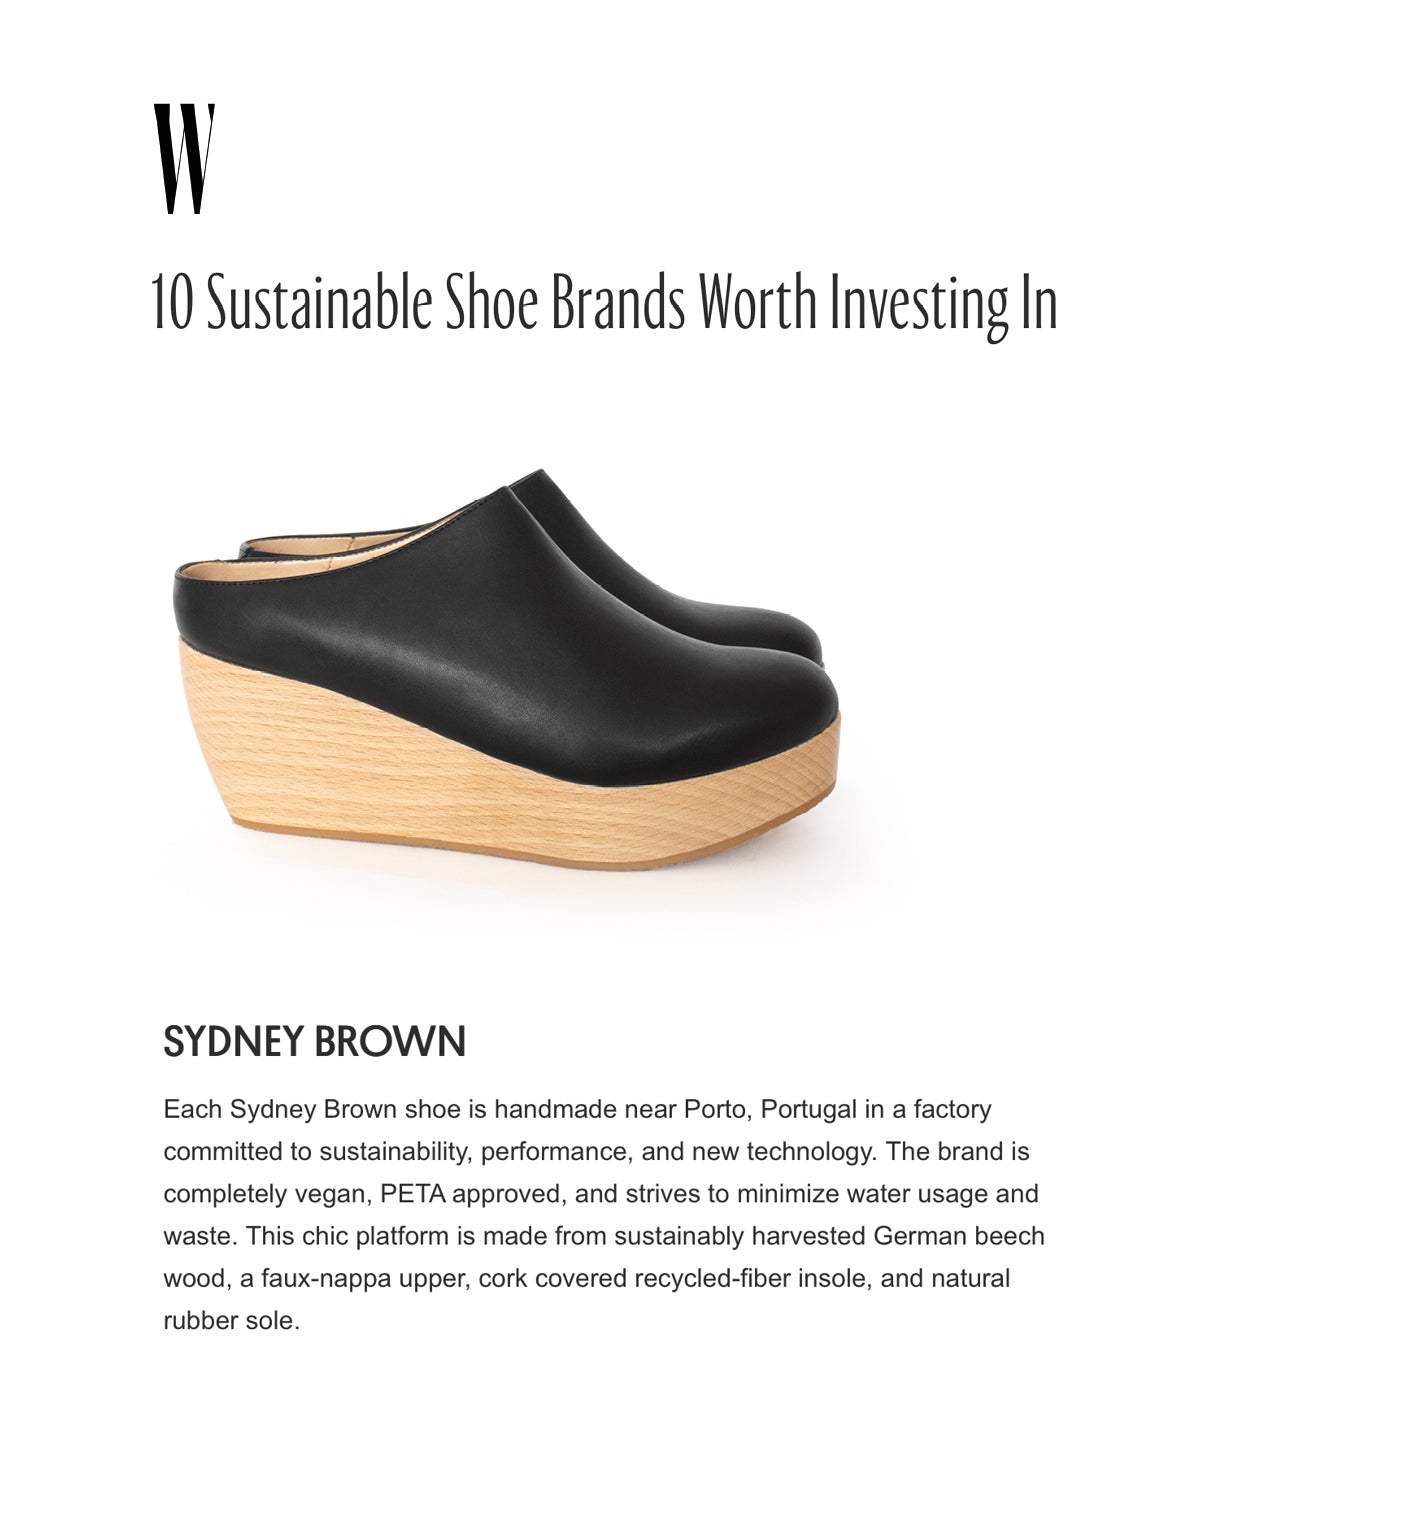 W Mag 10 Sustainable Shoe Brands Worth Investing In